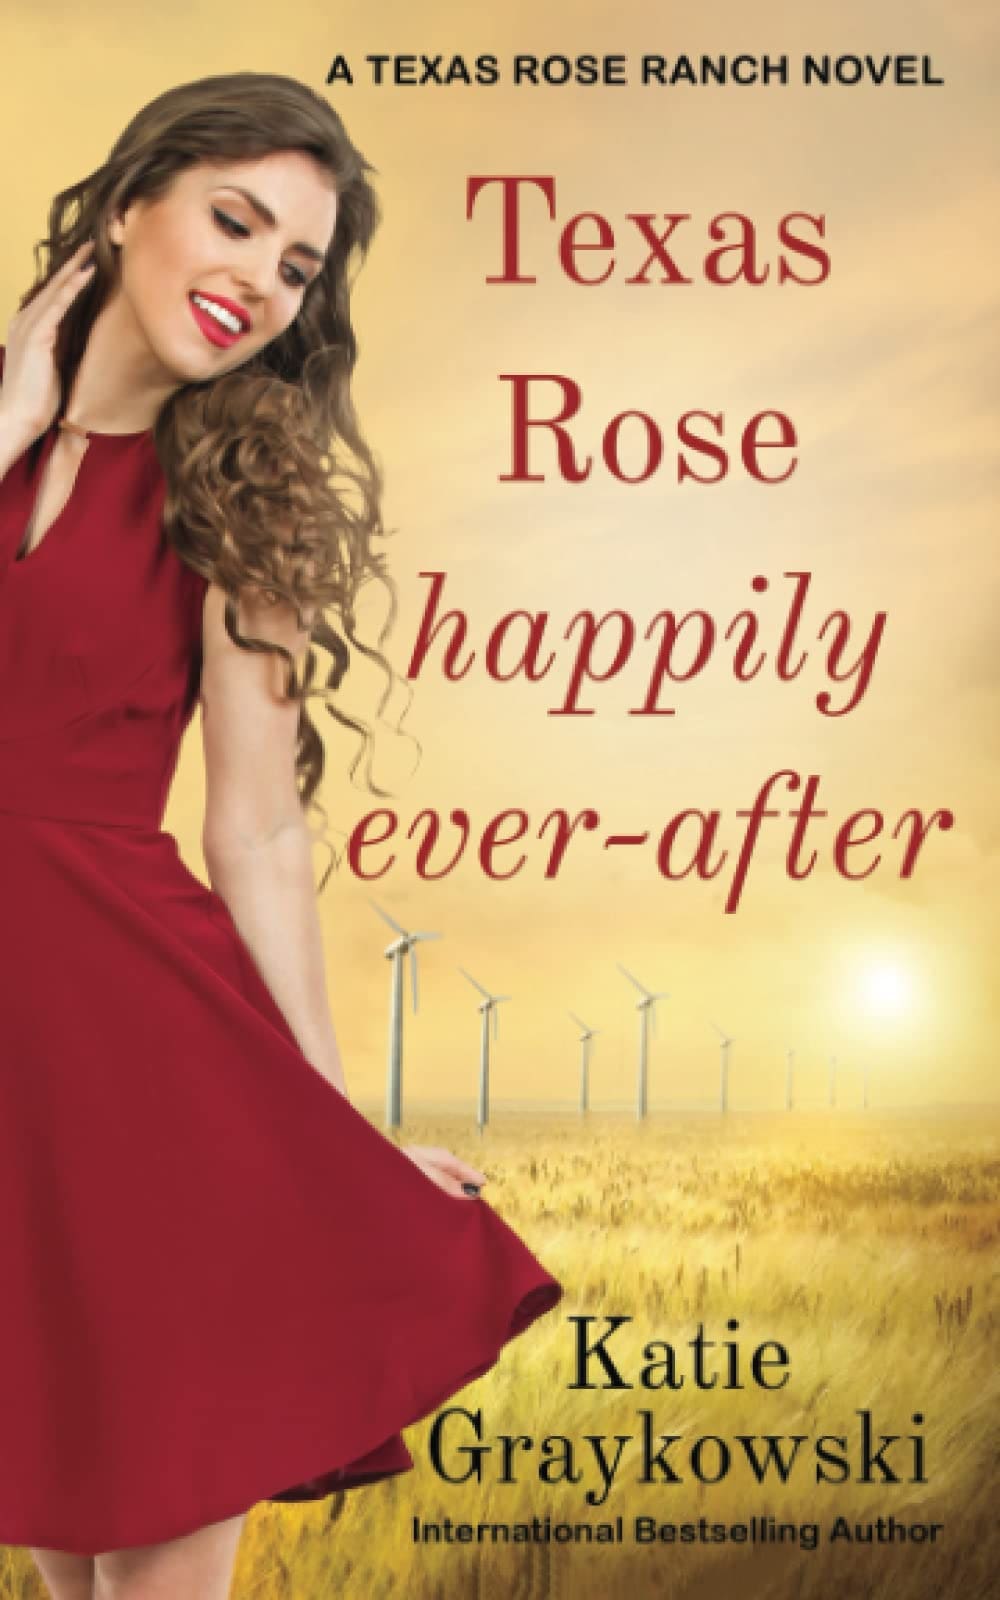 Texas Rose Happily Ever-After: A Texas Rose Ranch Novel Book 5